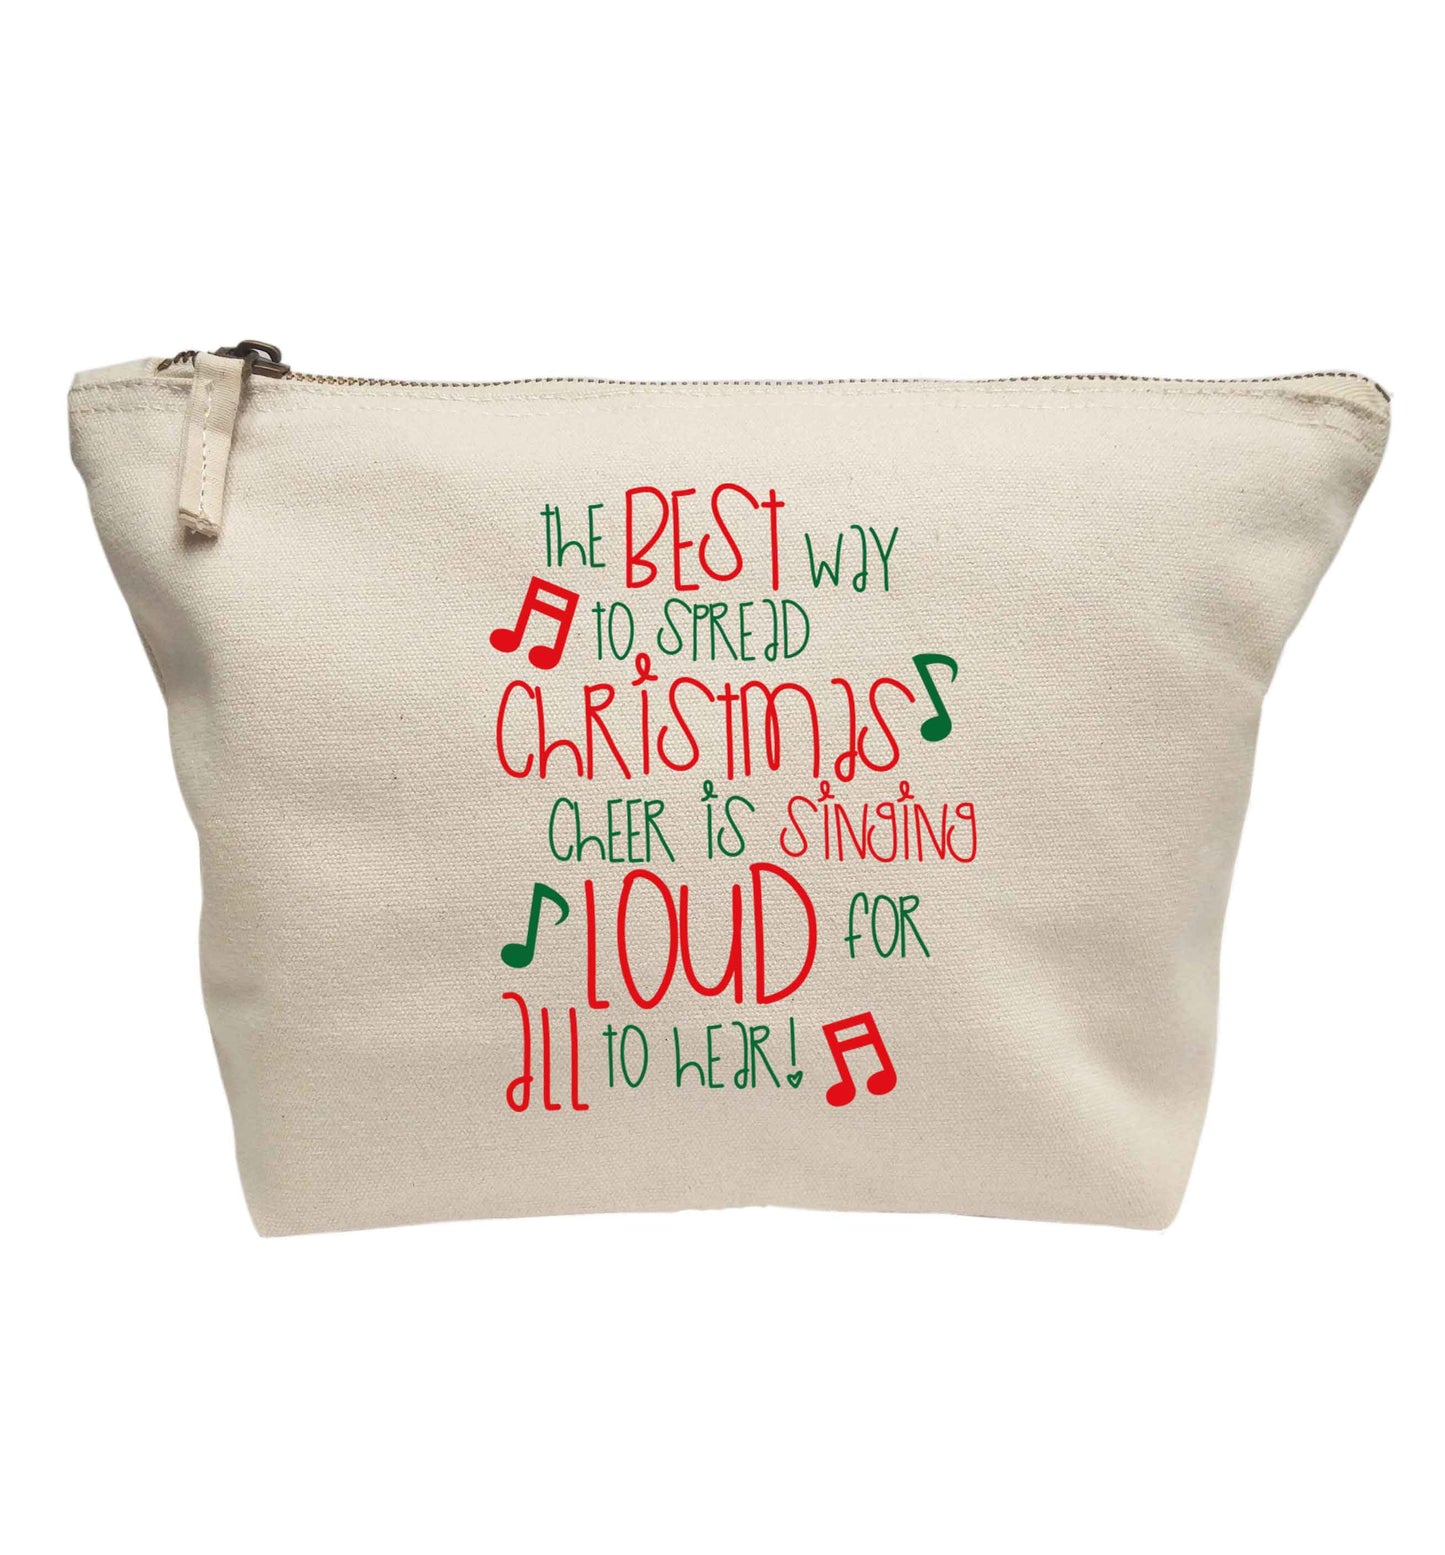 The best way to spread Christmas cheer is singing loud for all to hear | Makeup / wash bag